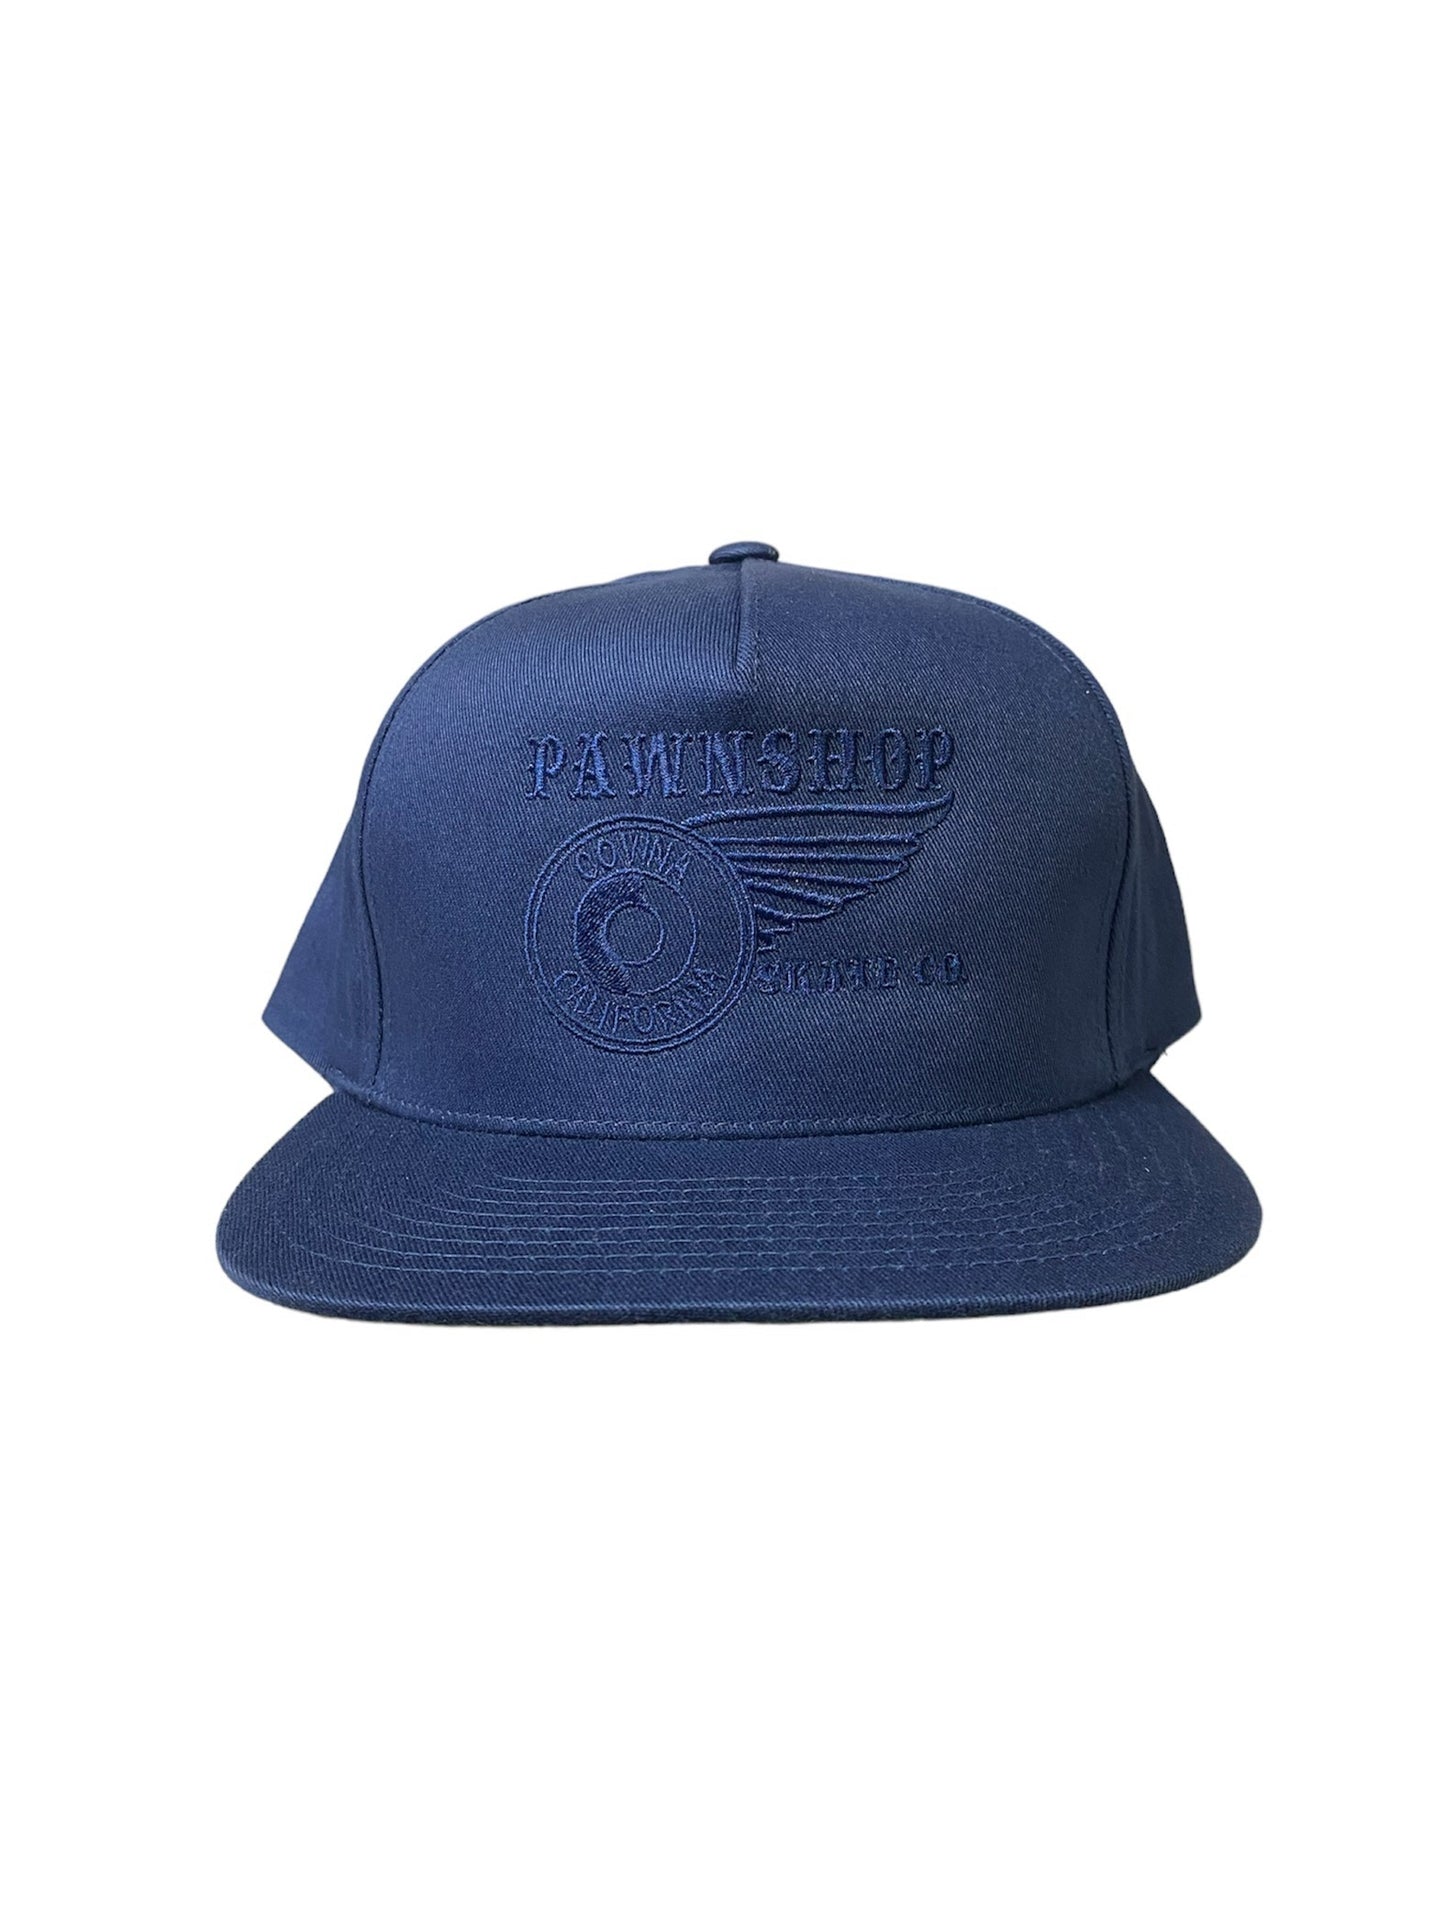 Pawnshop W&W Embroidered Classic Hat